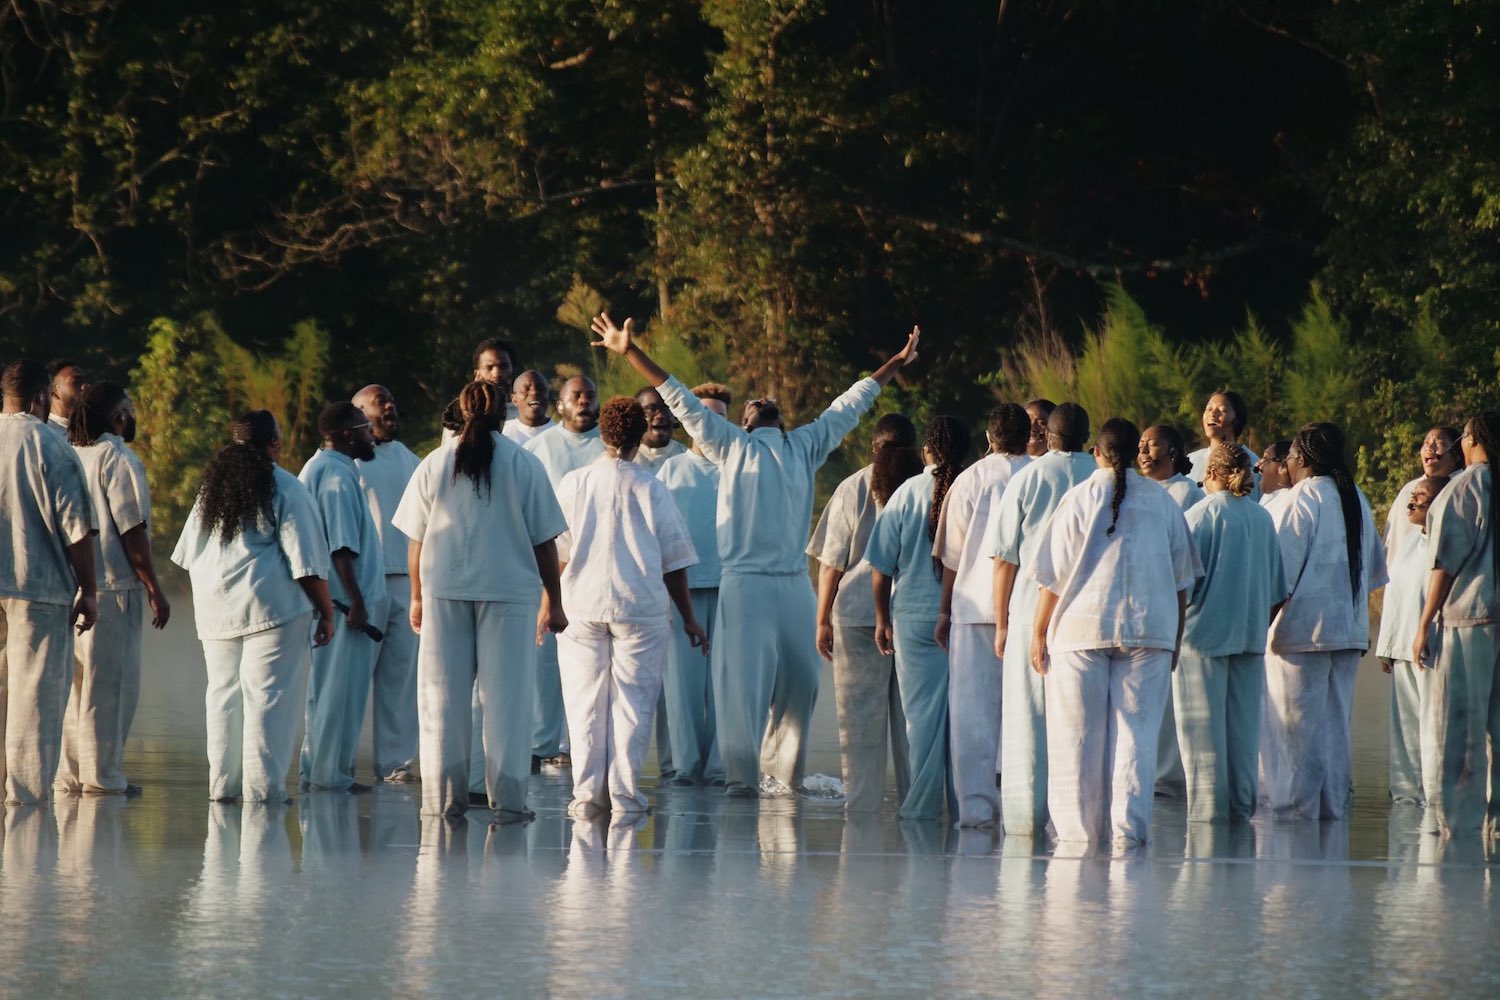 Kanye West Walks on Water During His Sunday Church Service